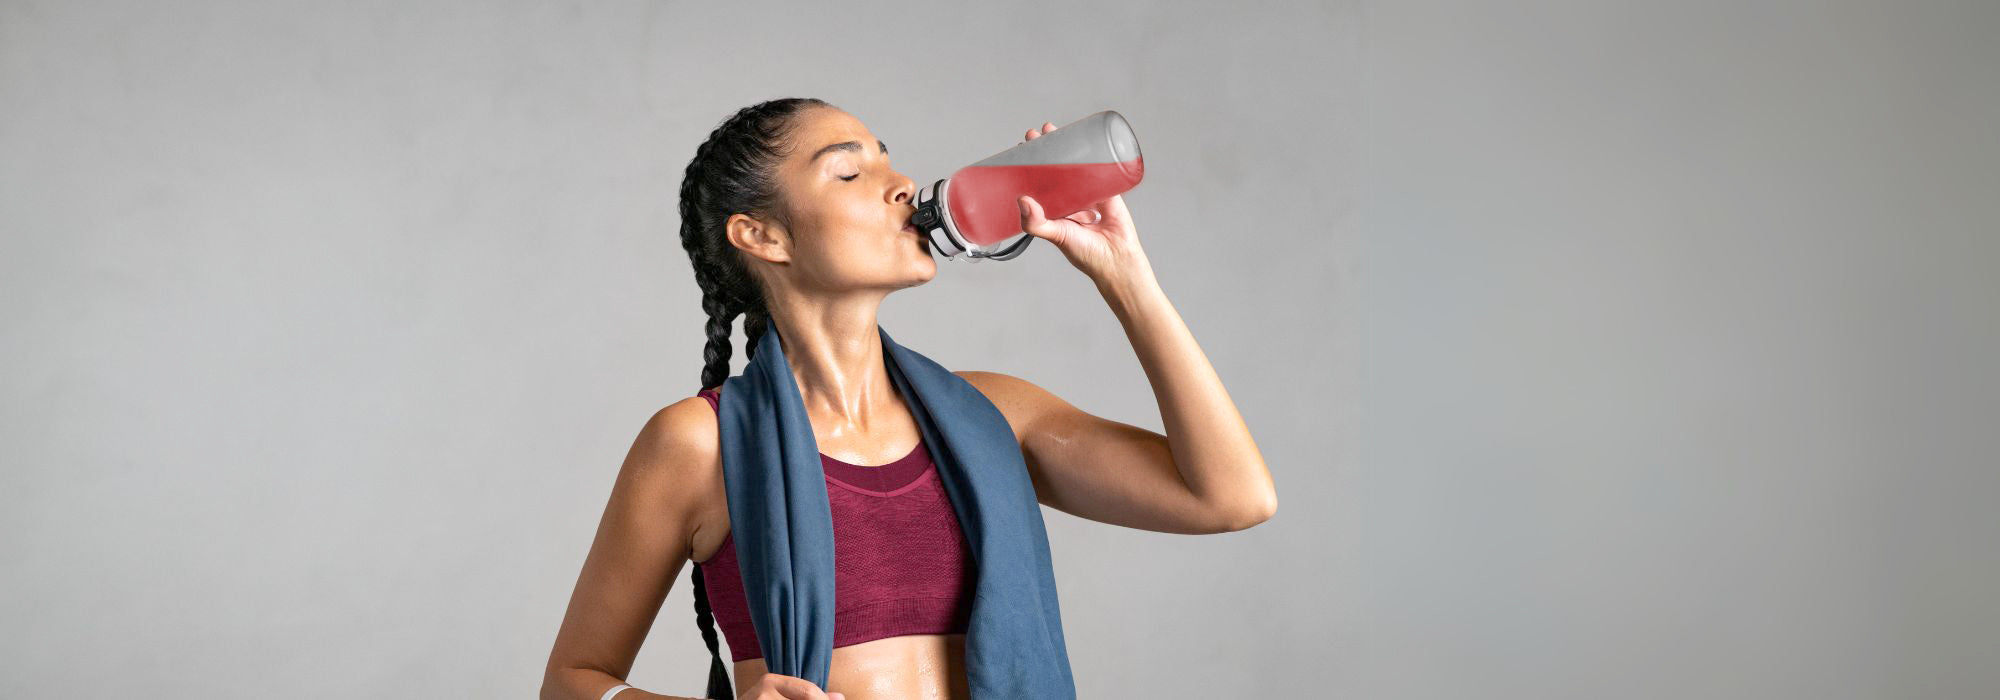 Women Drinking, Casual, Fitness, Water Bottle, Red Flavour